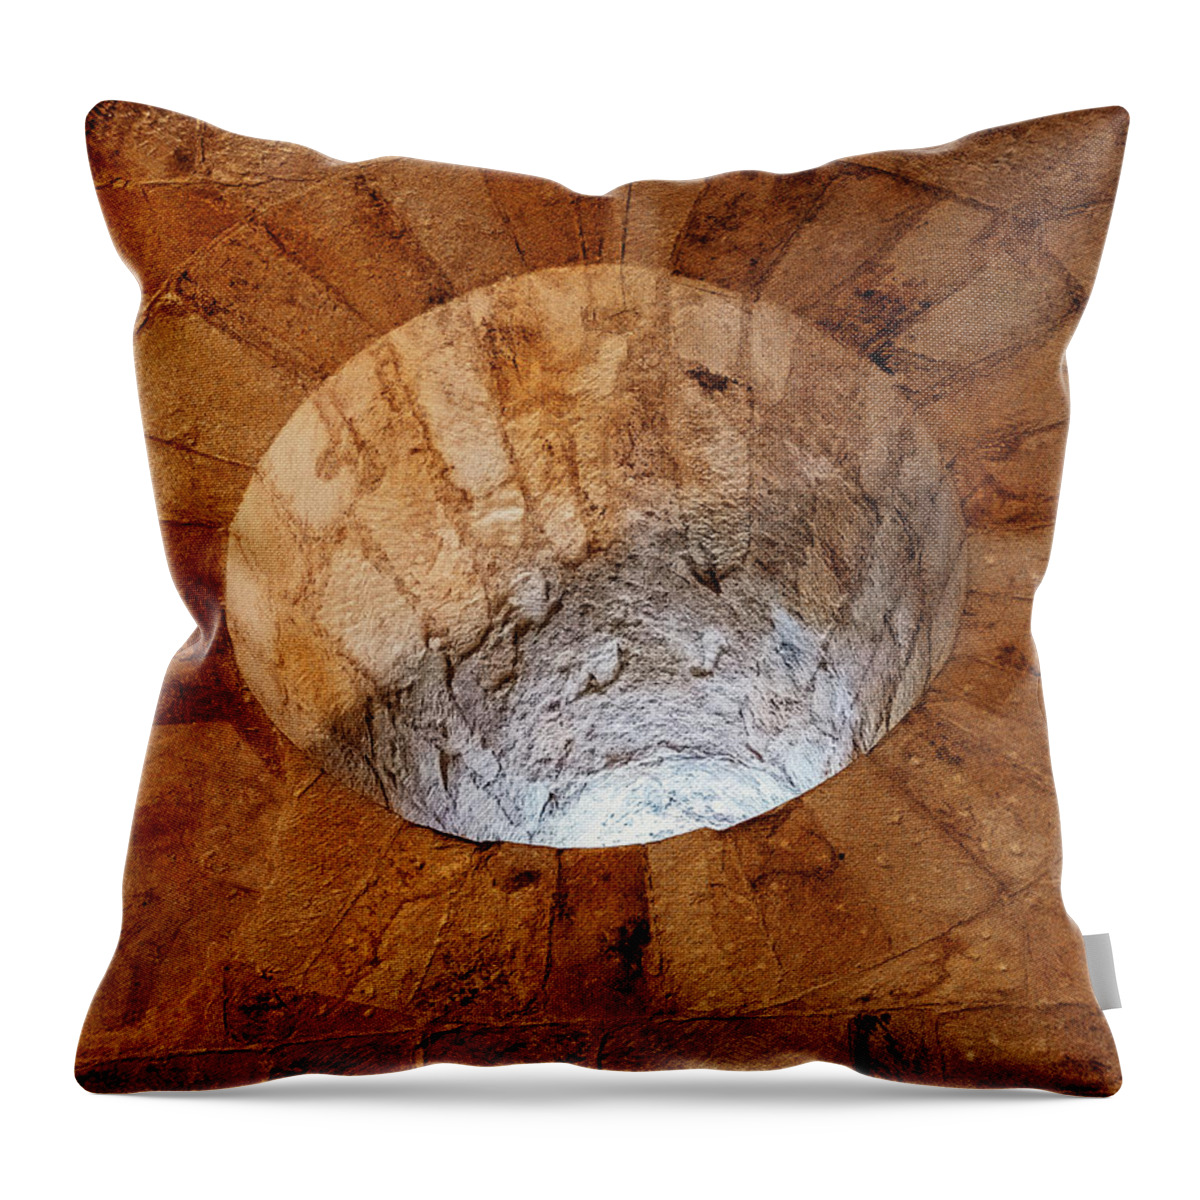 Cudillero Spain Throw Pillow featuring the photograph Cathedral Window by Tom Singleton